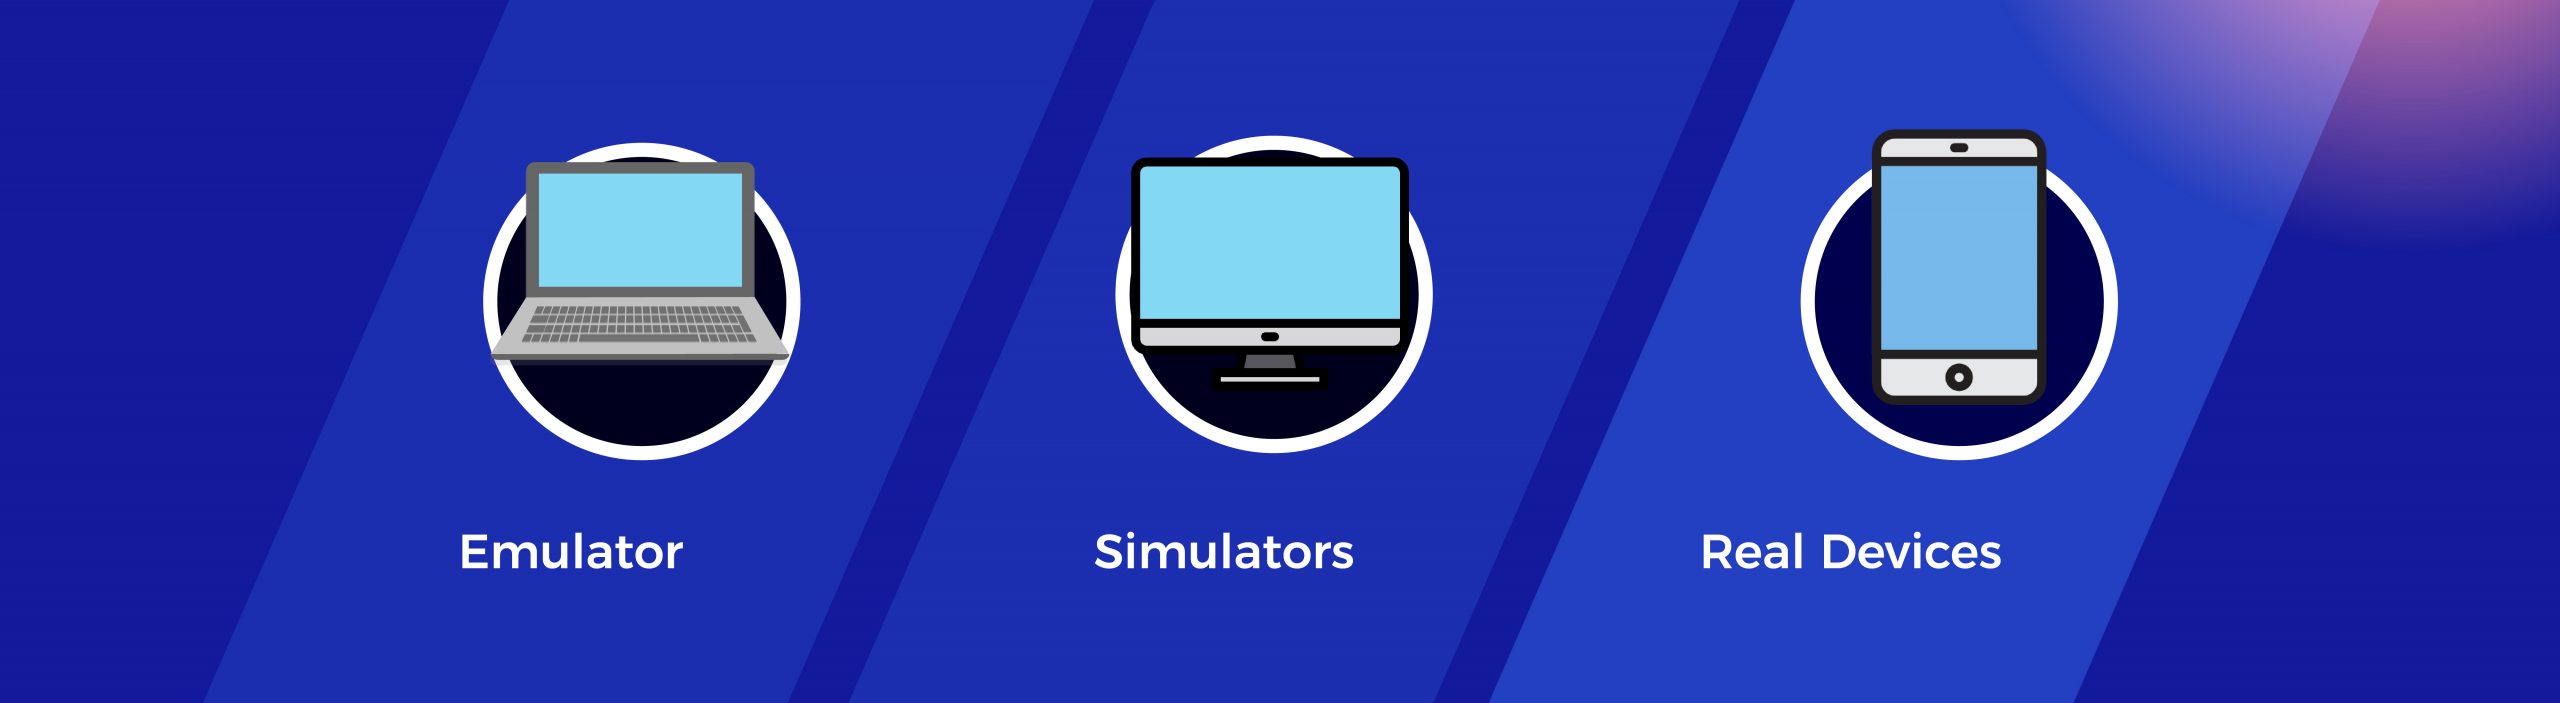 Simulators, Emulators, or Real Devices: Which is the Best for Mobile Testing?